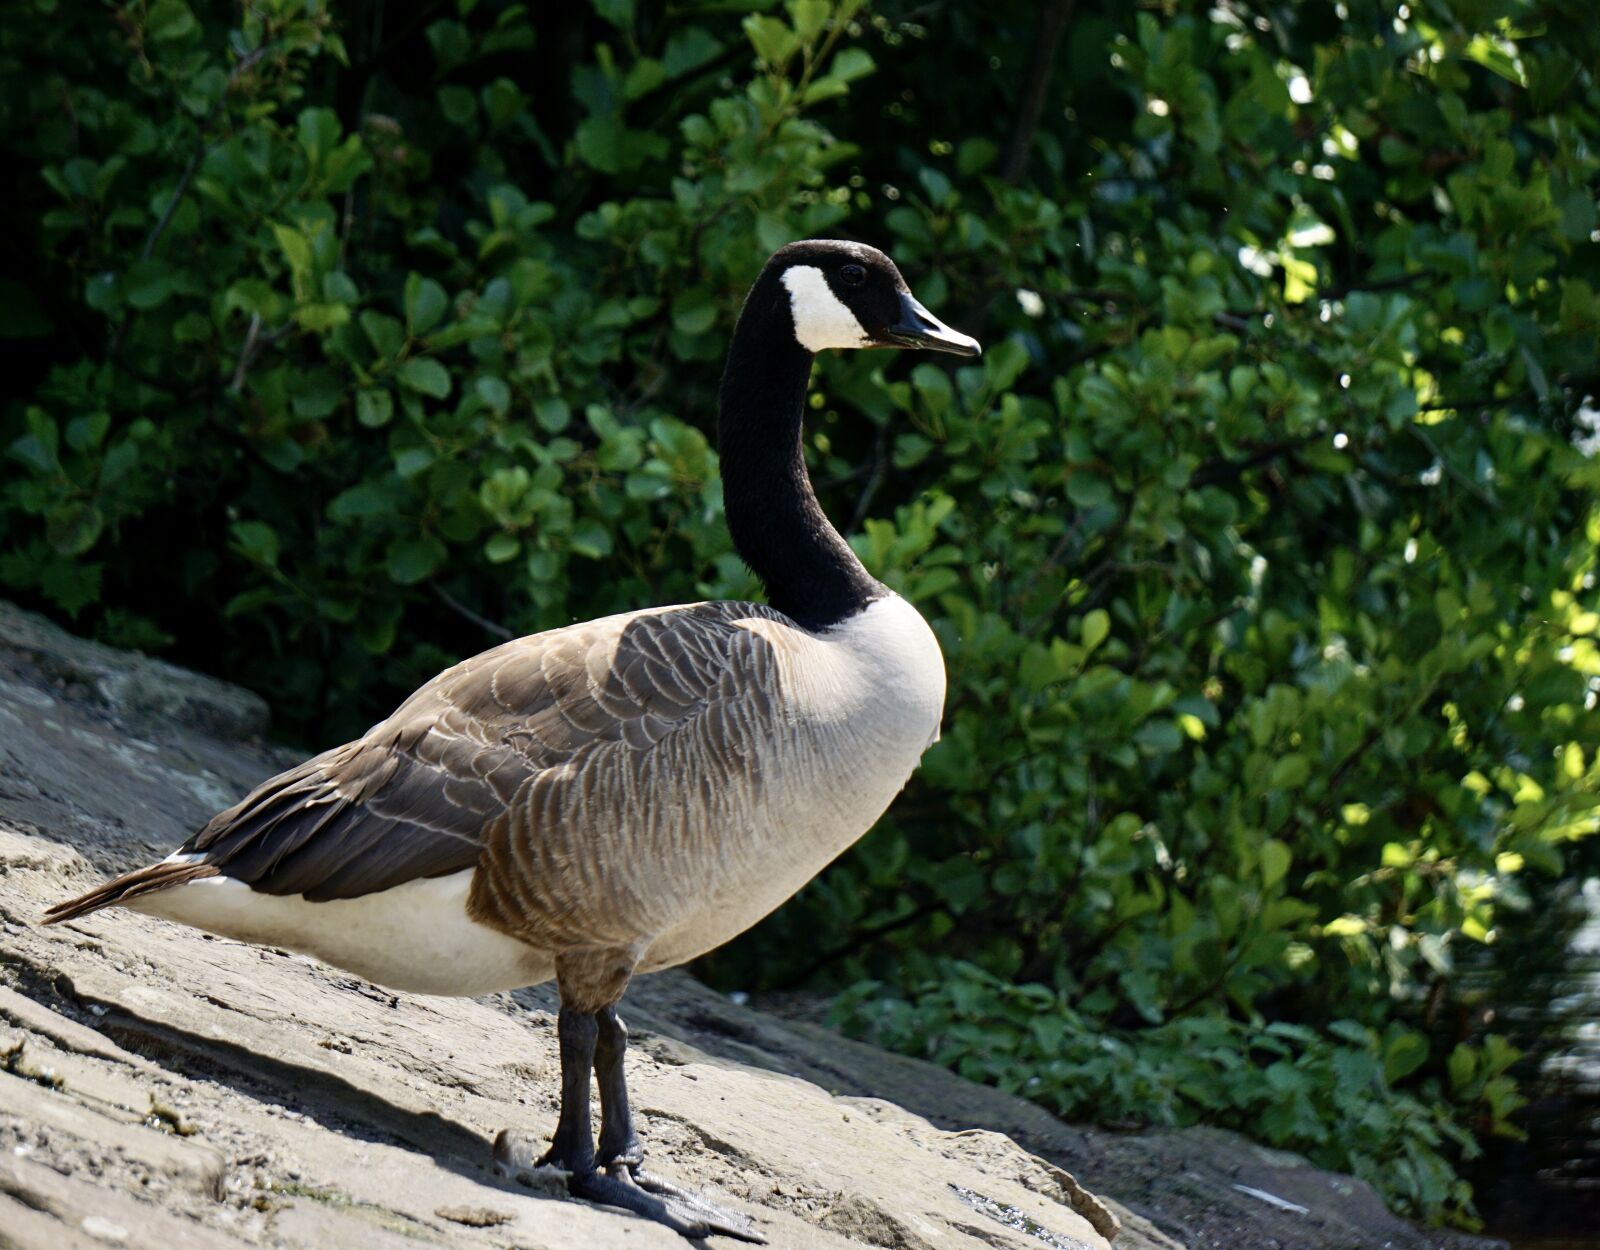 Sony a6000 sample photo. Canada goose, goose, nature photography